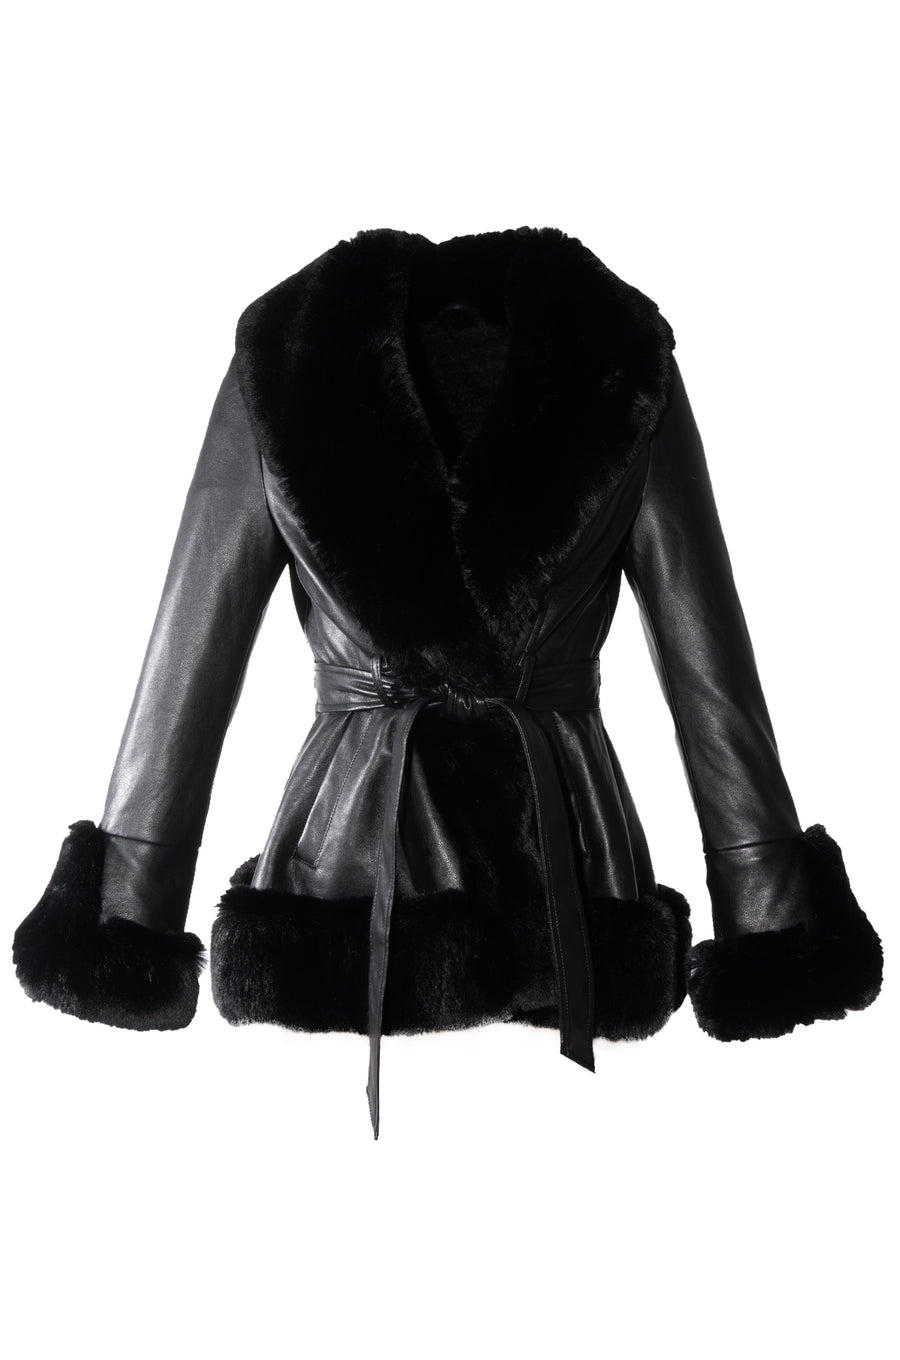 Black plus sized faux leather jacket with a cinched waist and faux fur collar and cuff trim